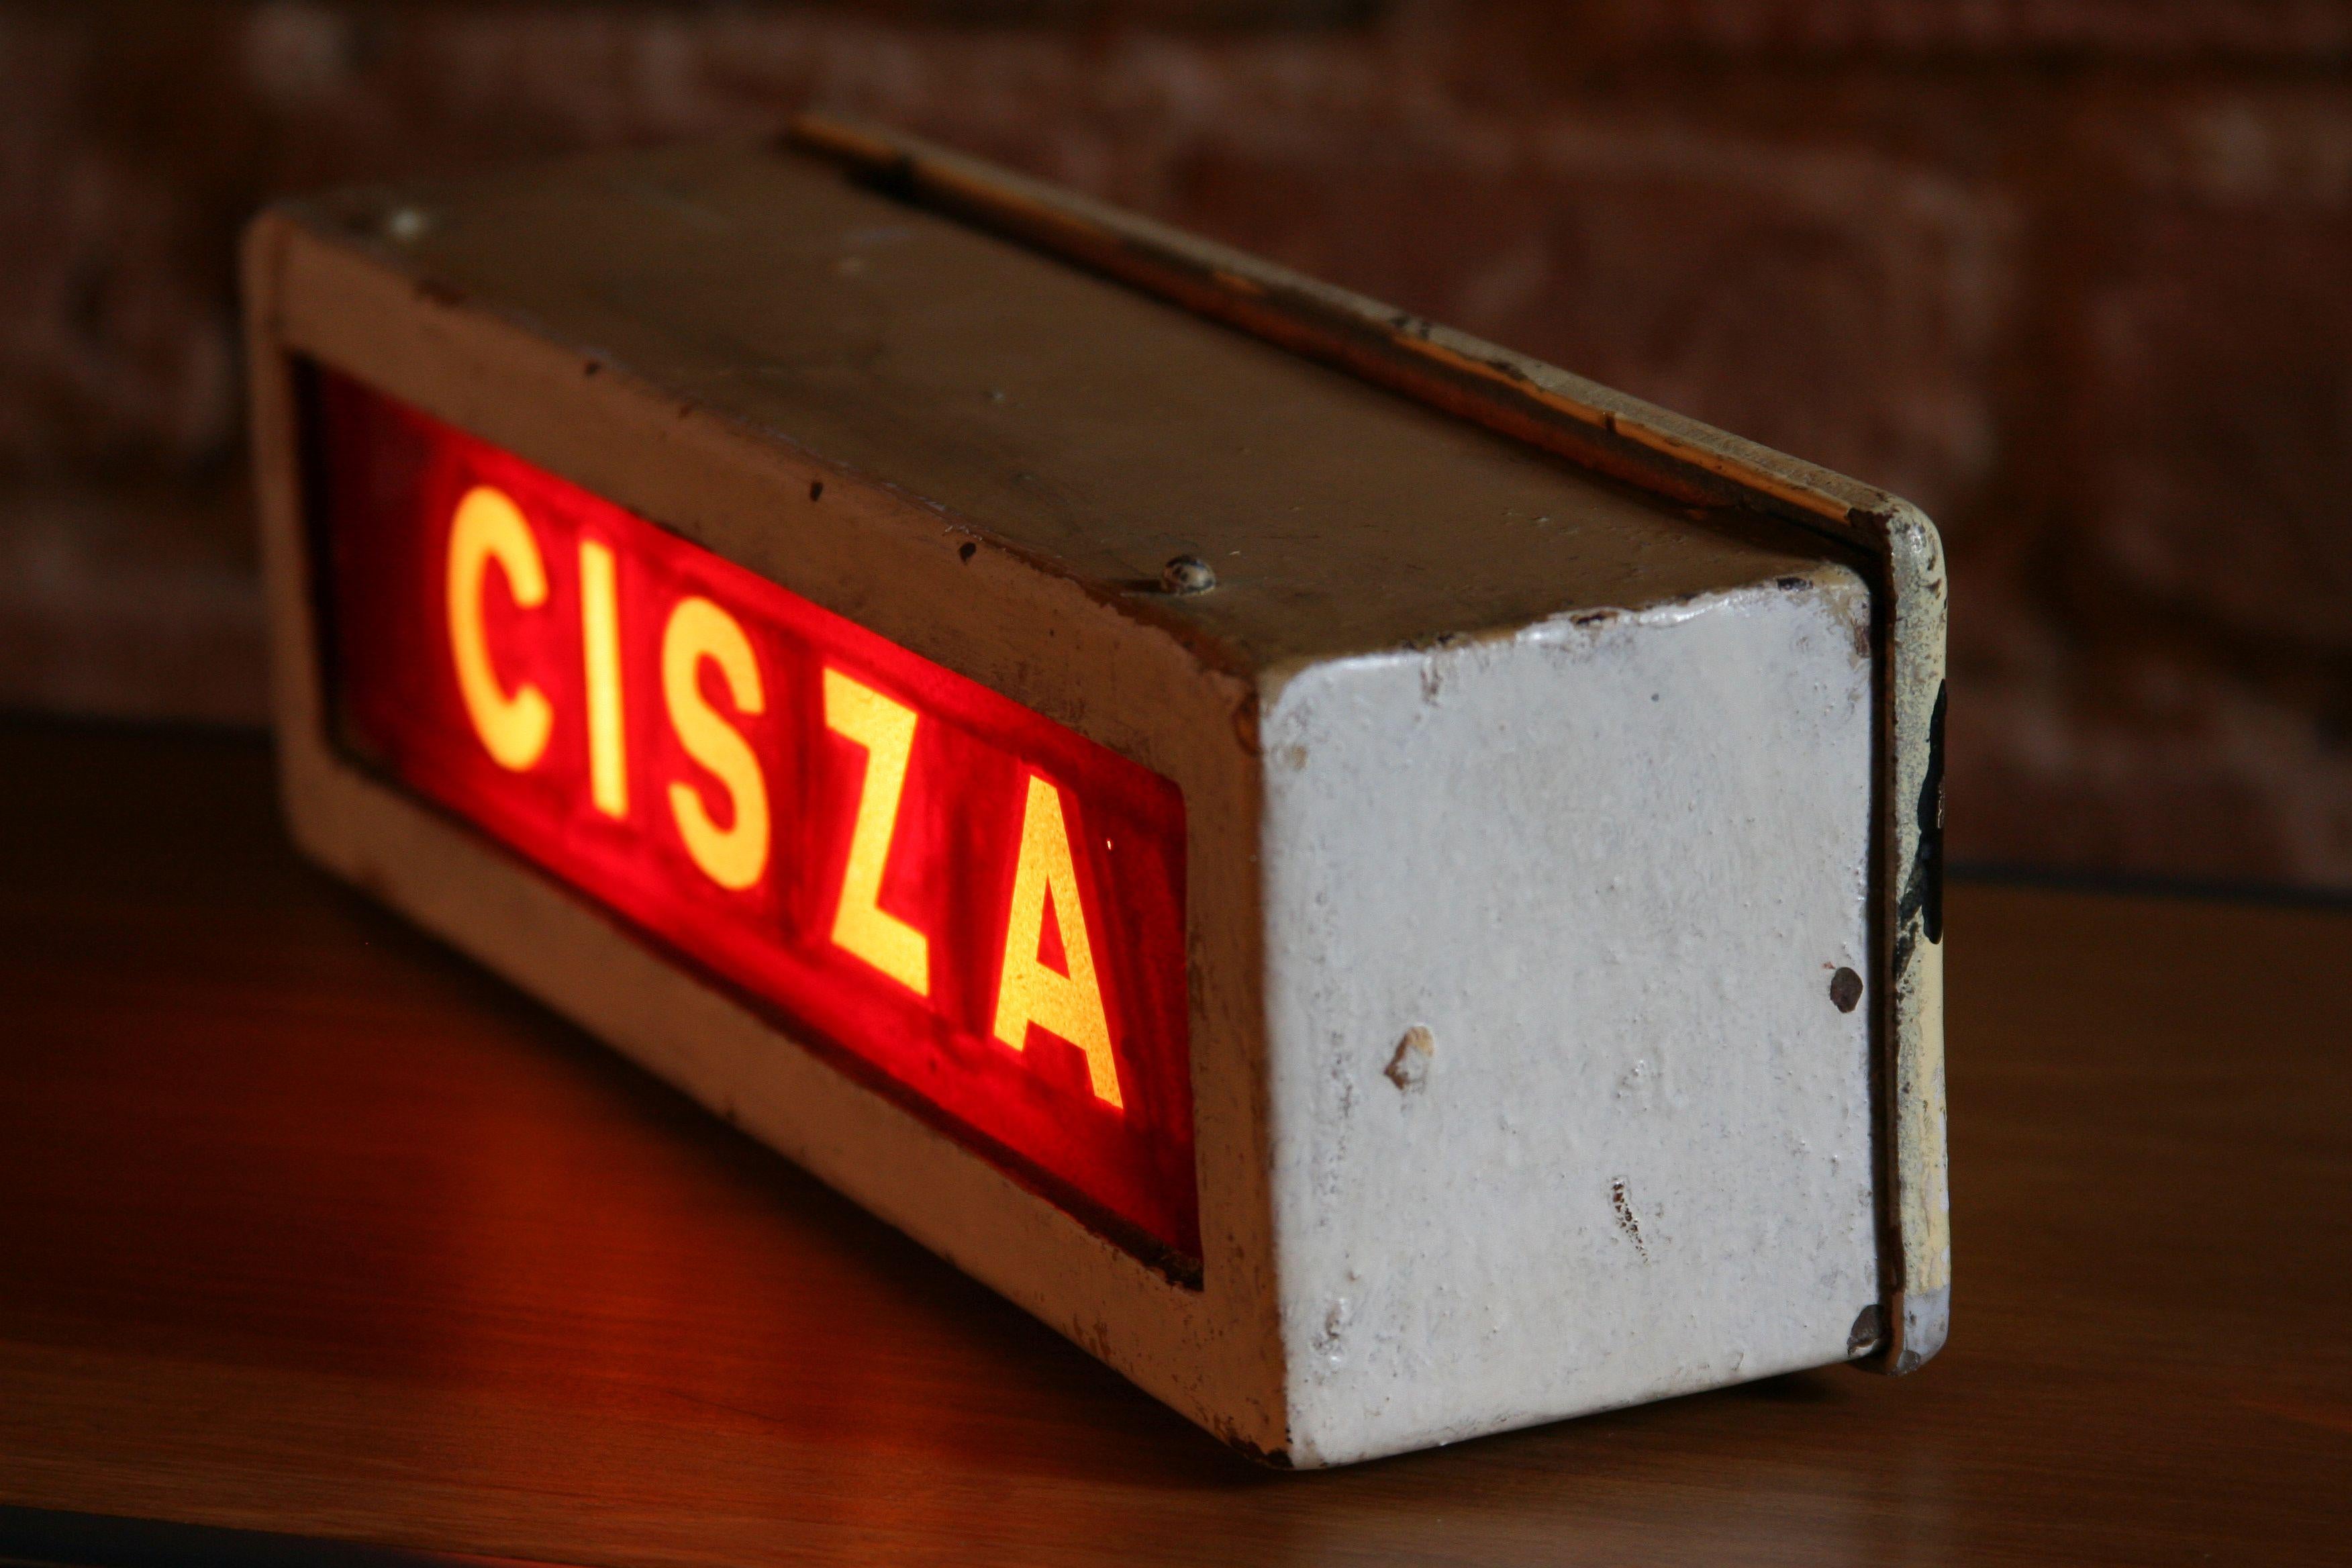 1950s Illuminated Theater Sign “Cisza”, Meaning “Silence” im Zustand „Gut“ in Warsaw, PL